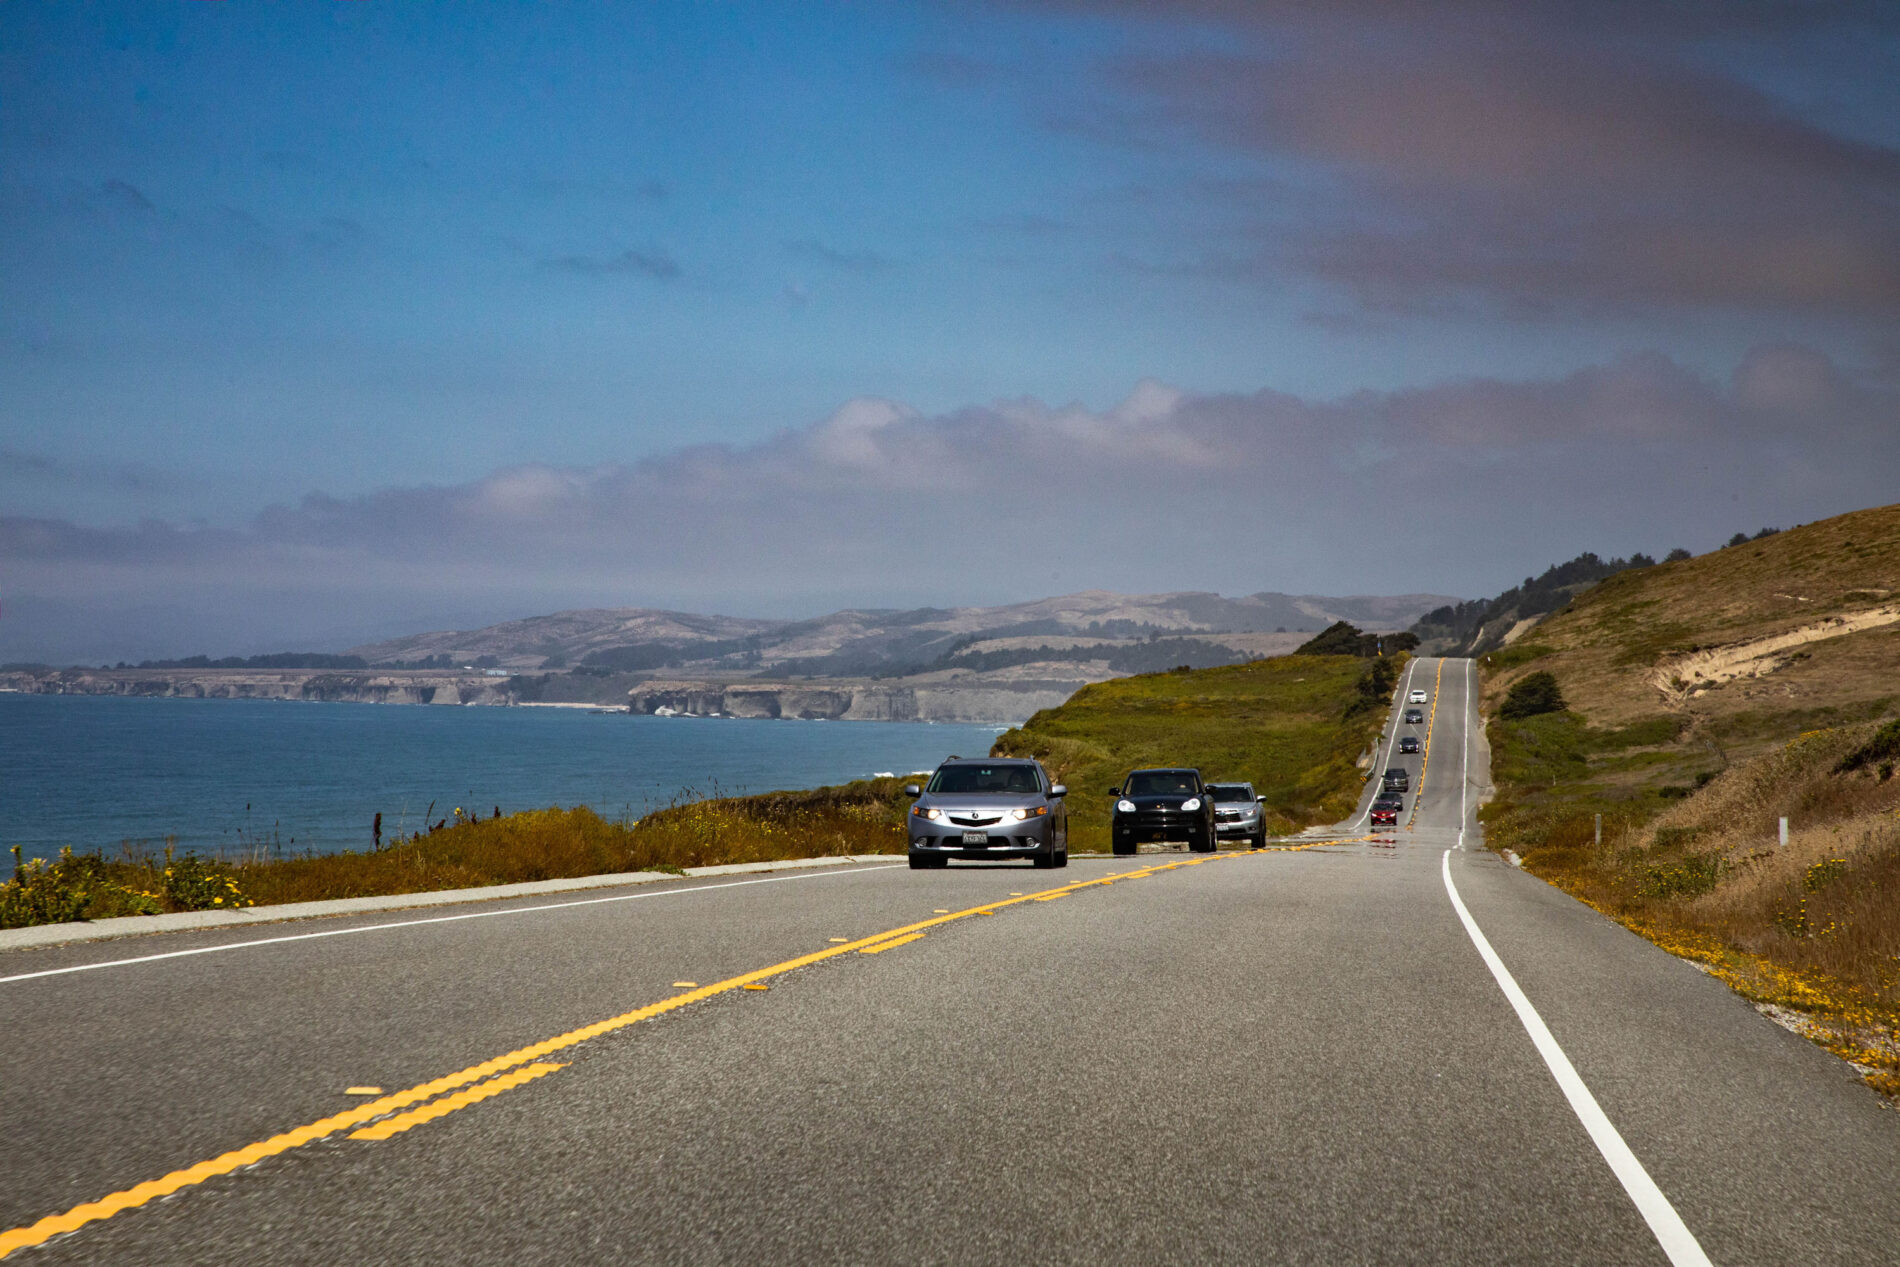 Beautiful scenery awaits you while driving the Pacific Coast Highway.